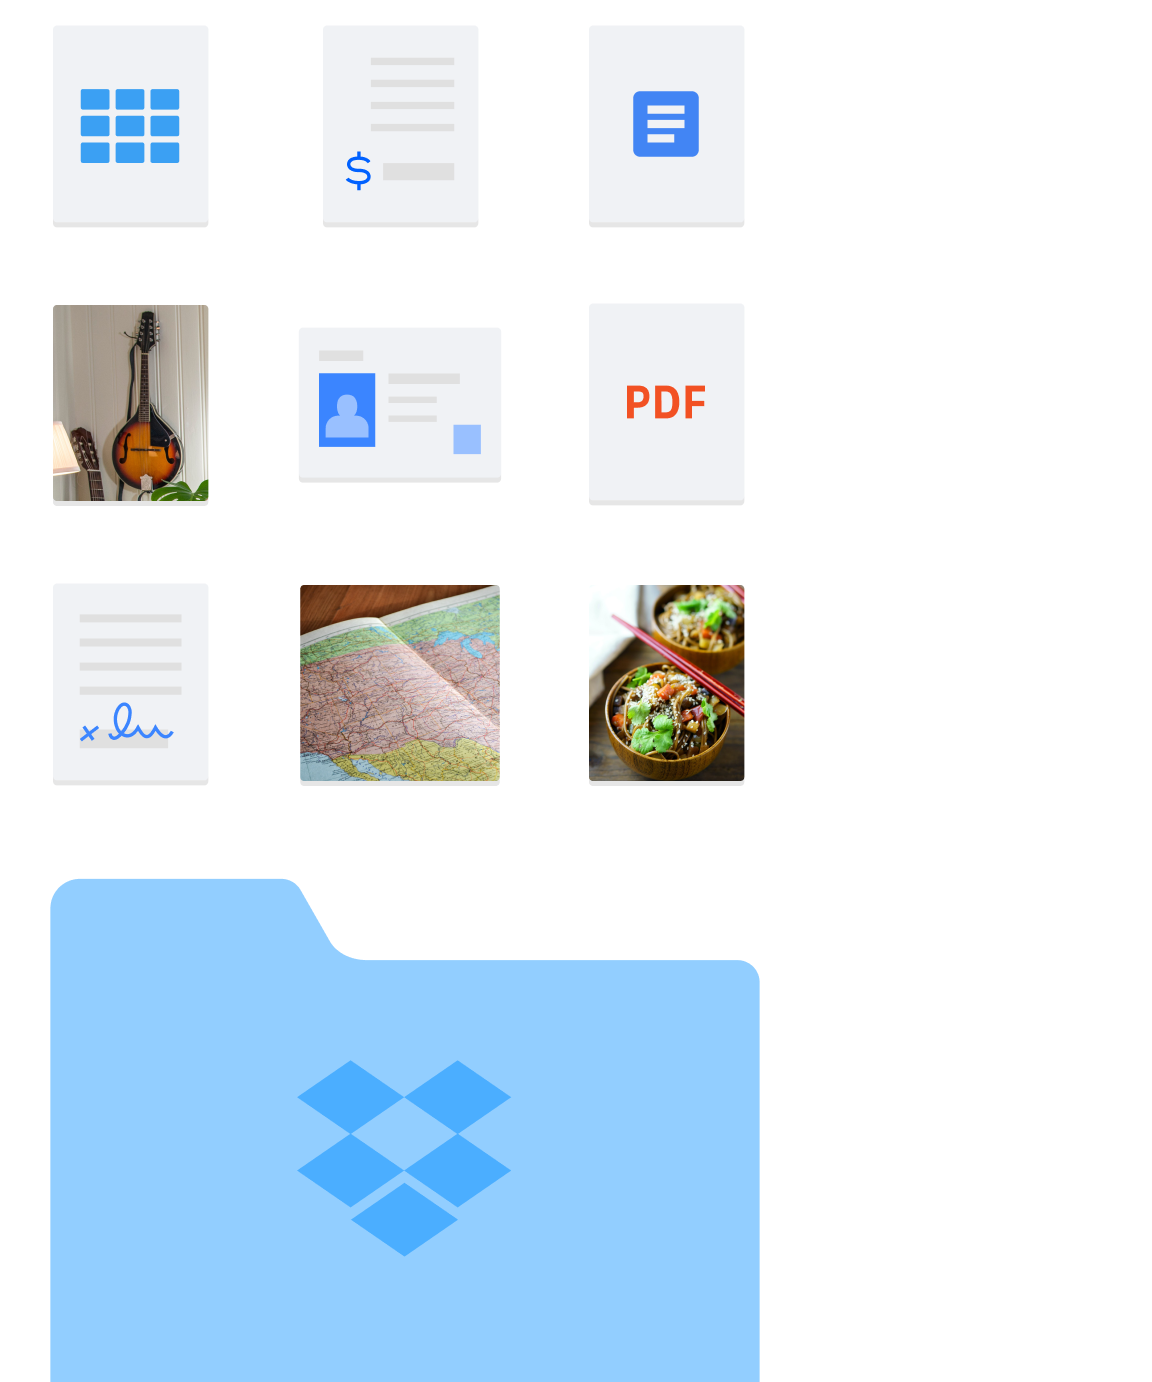 Image of various folder and file types, such as images and docs, contained in Dropbox.